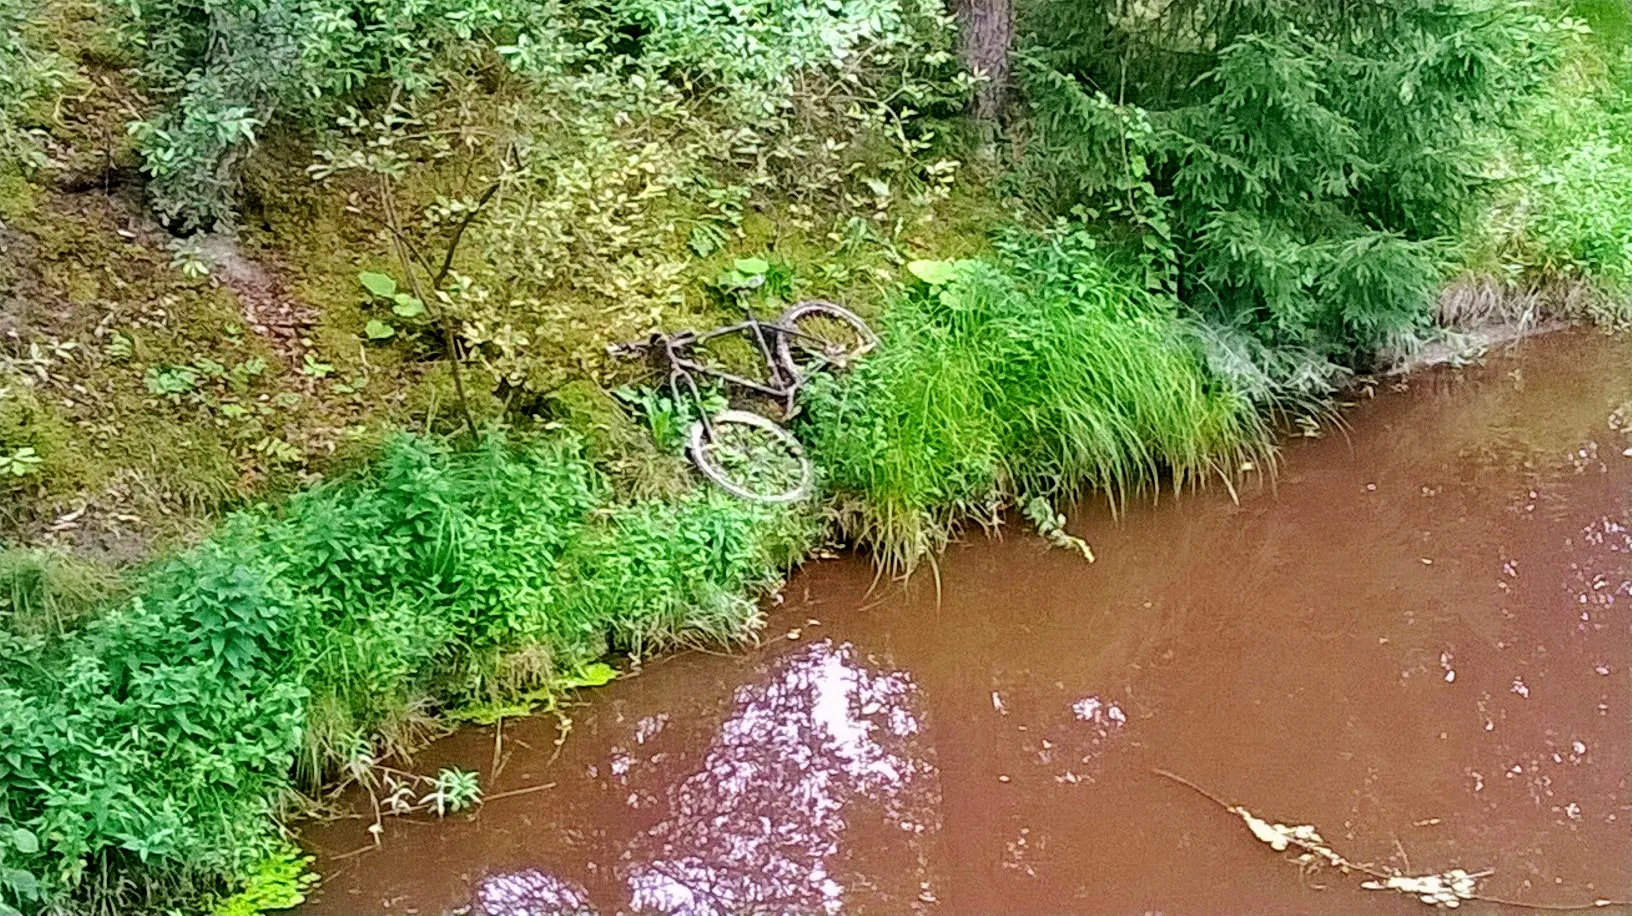 Photo showing: Old rushed Bicycle abandoned on the River side